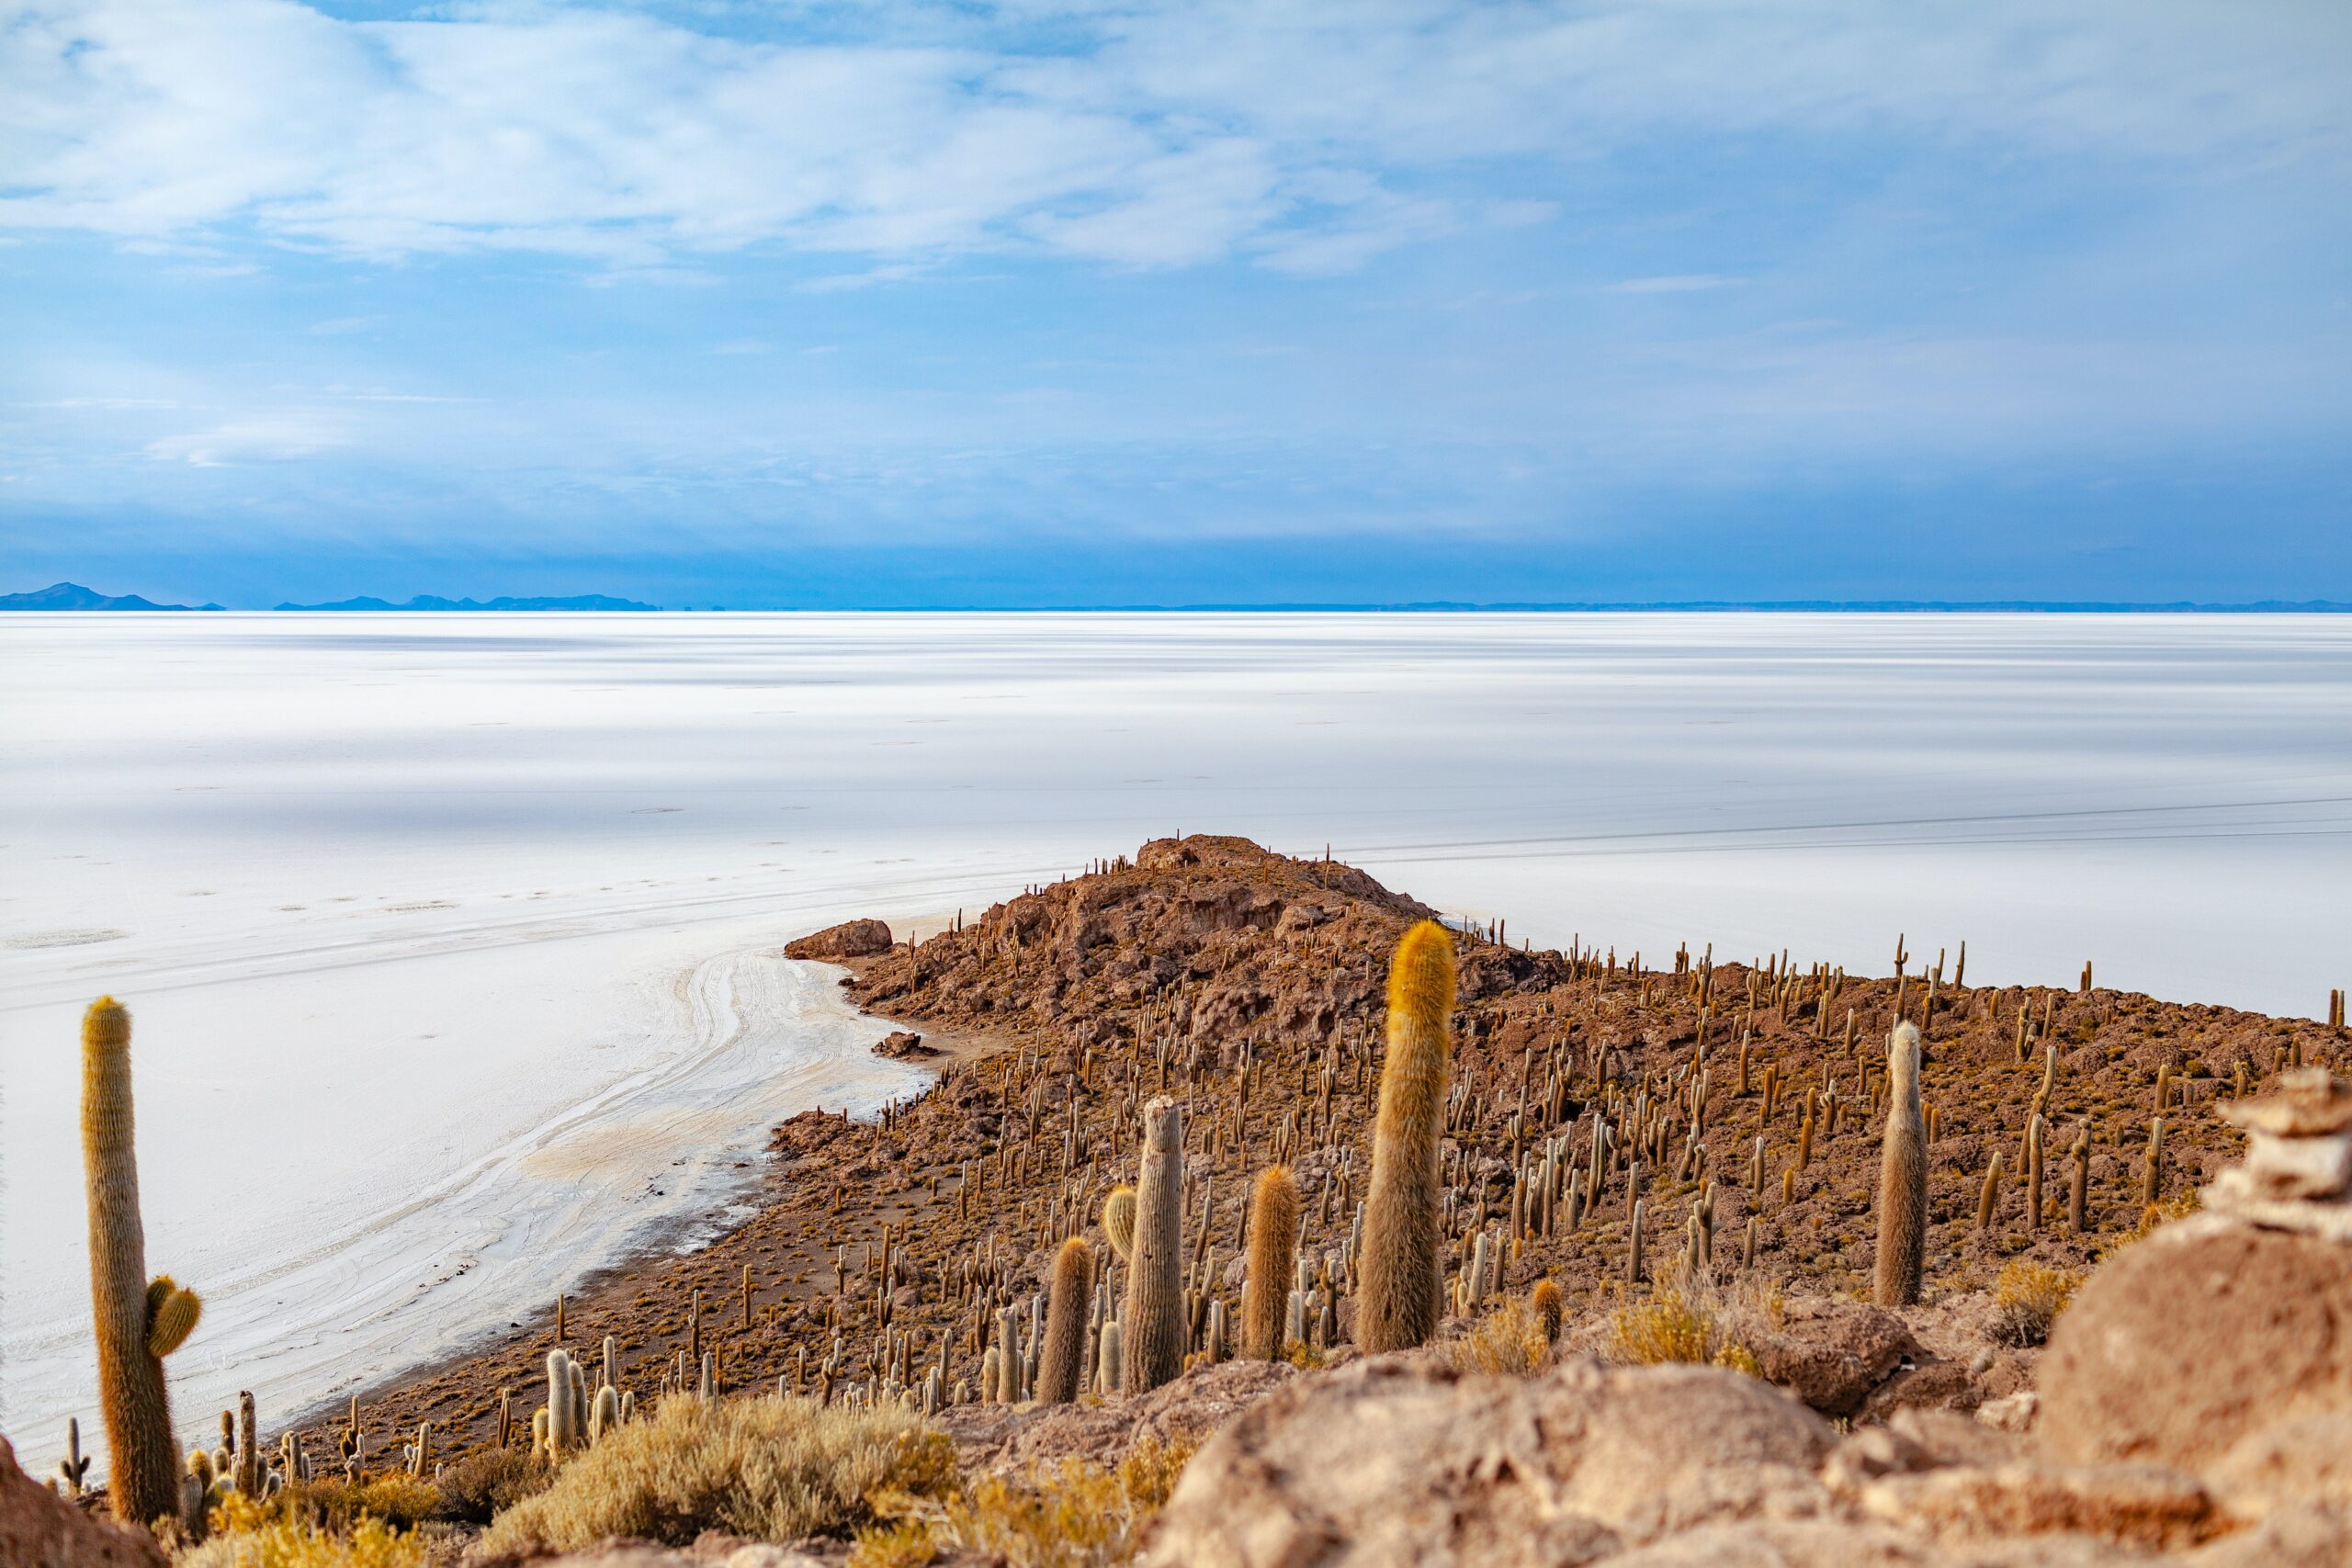 Salt lands in Bolivia, a must see location during your South America travel
